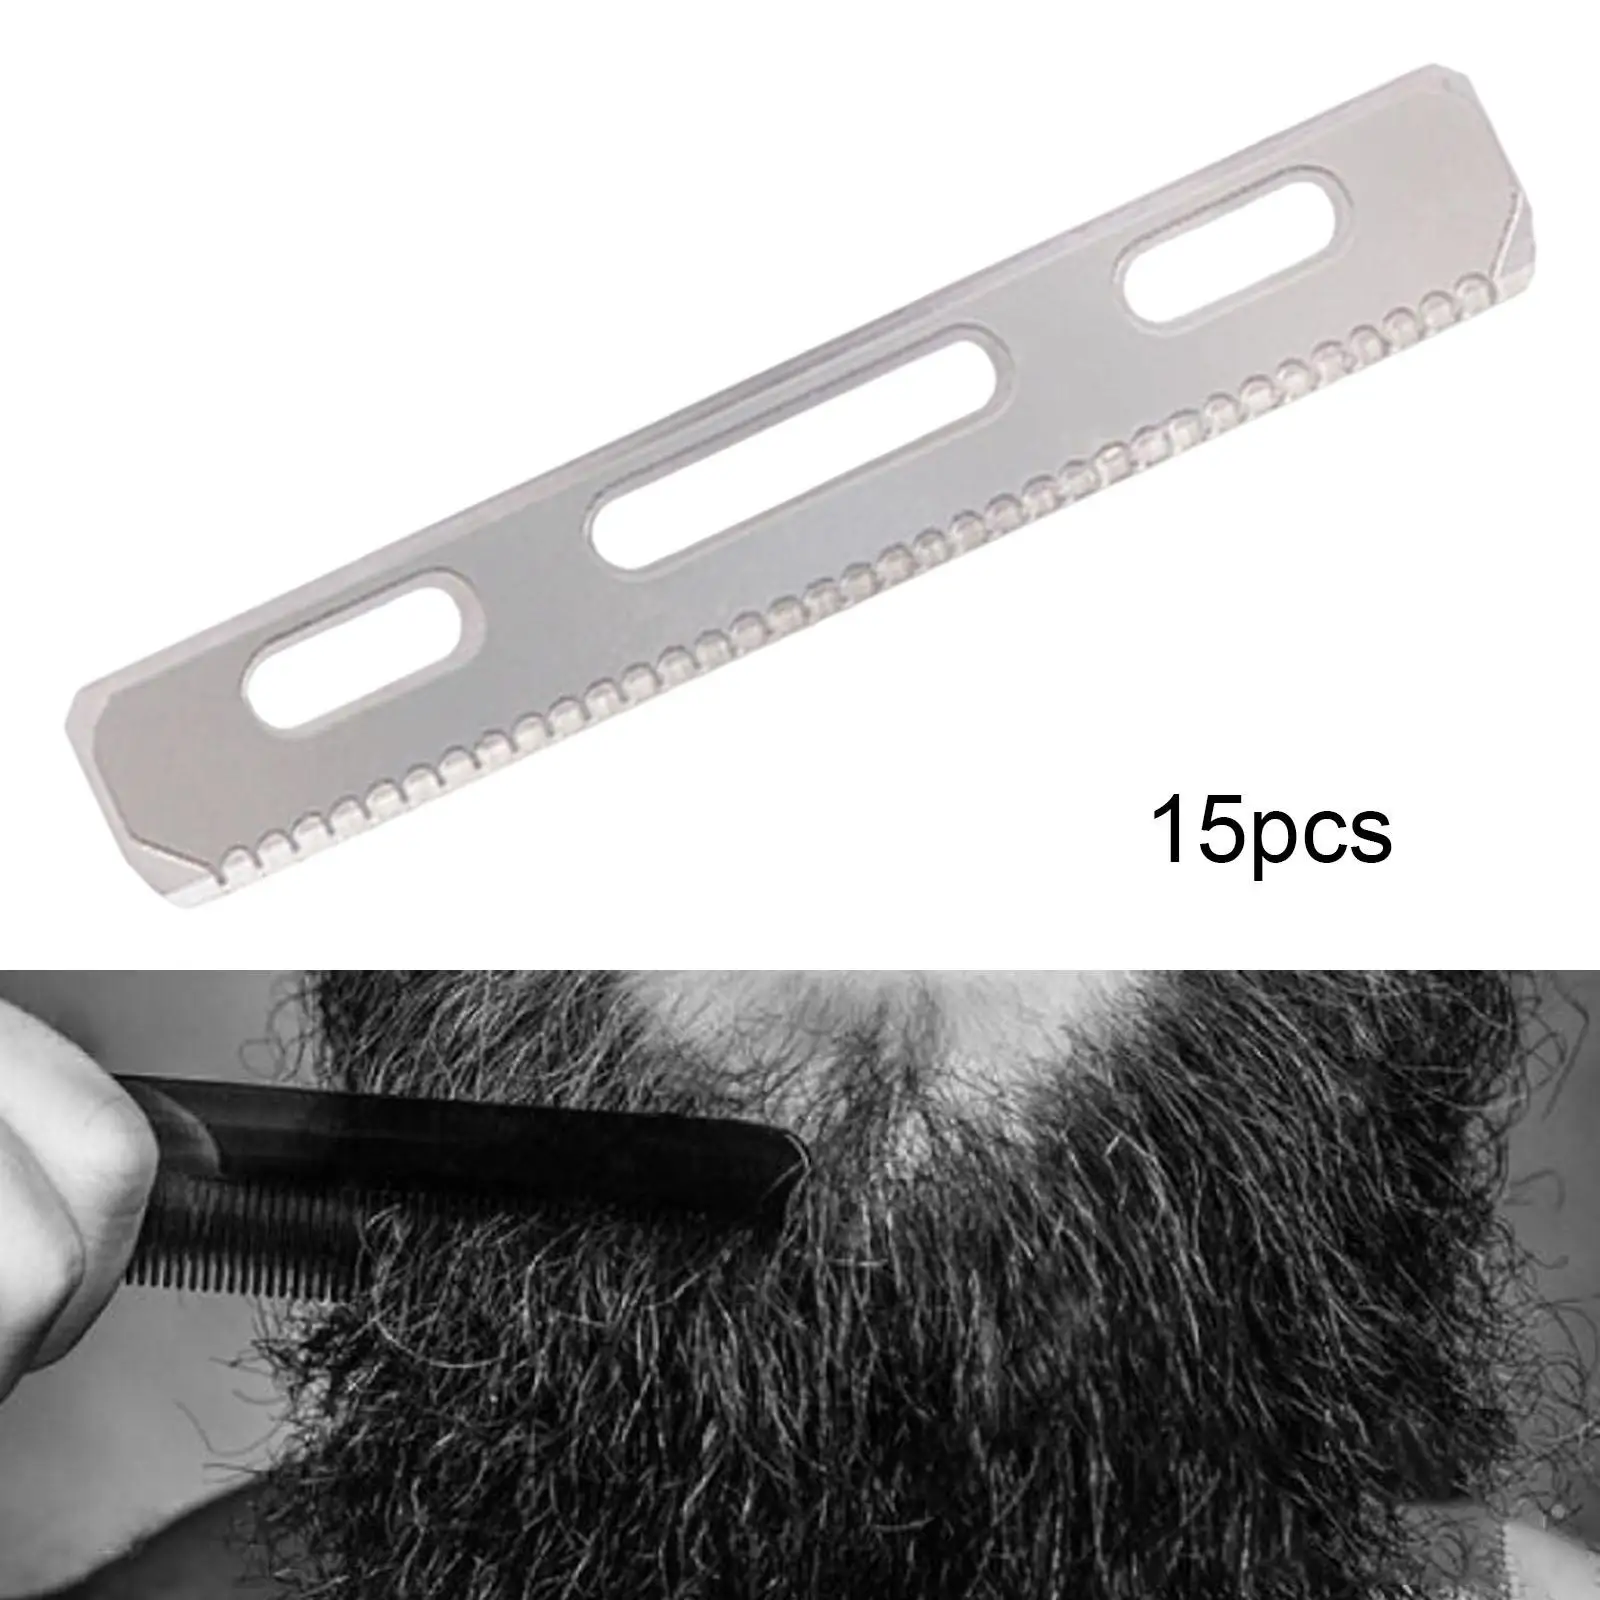 Eyebrow Trimmer Blades Facial with Cover Eyebrow Shaping Shaver Knife for Women Men